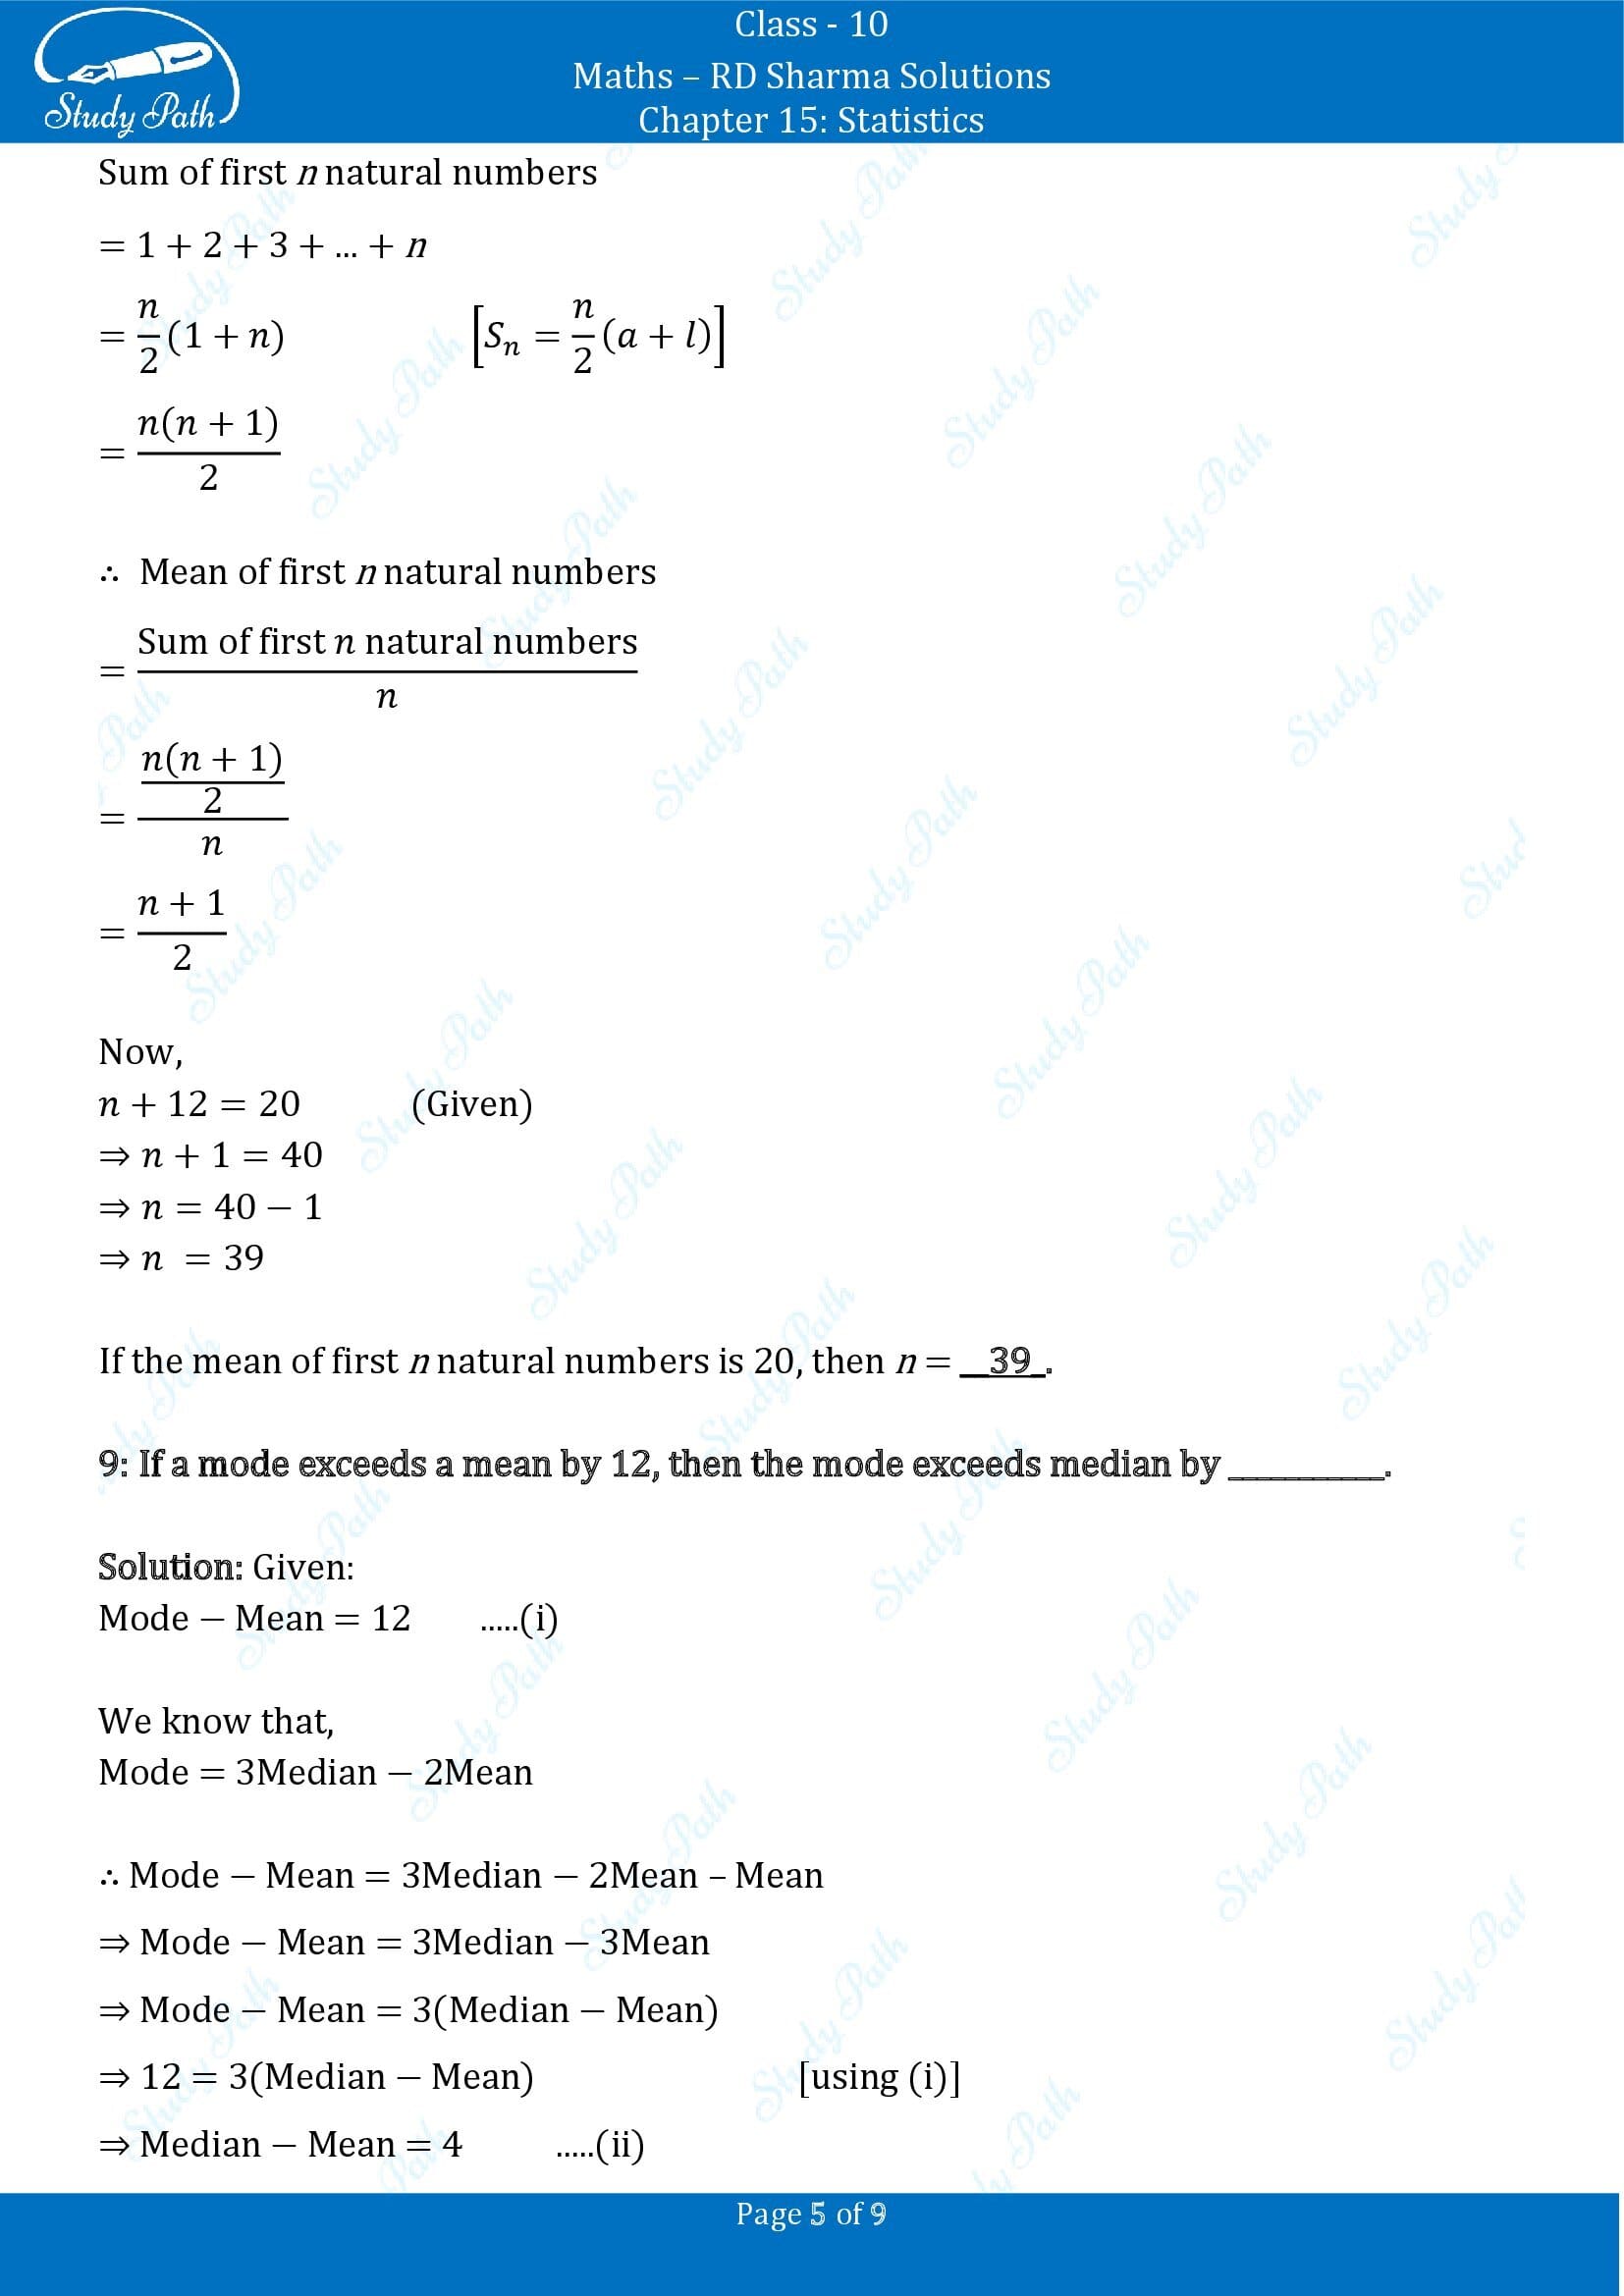 RD Sharma Solutions Class 10 Chapter 15 Statistics Fill in the Blank Type Questions FBQs 00005